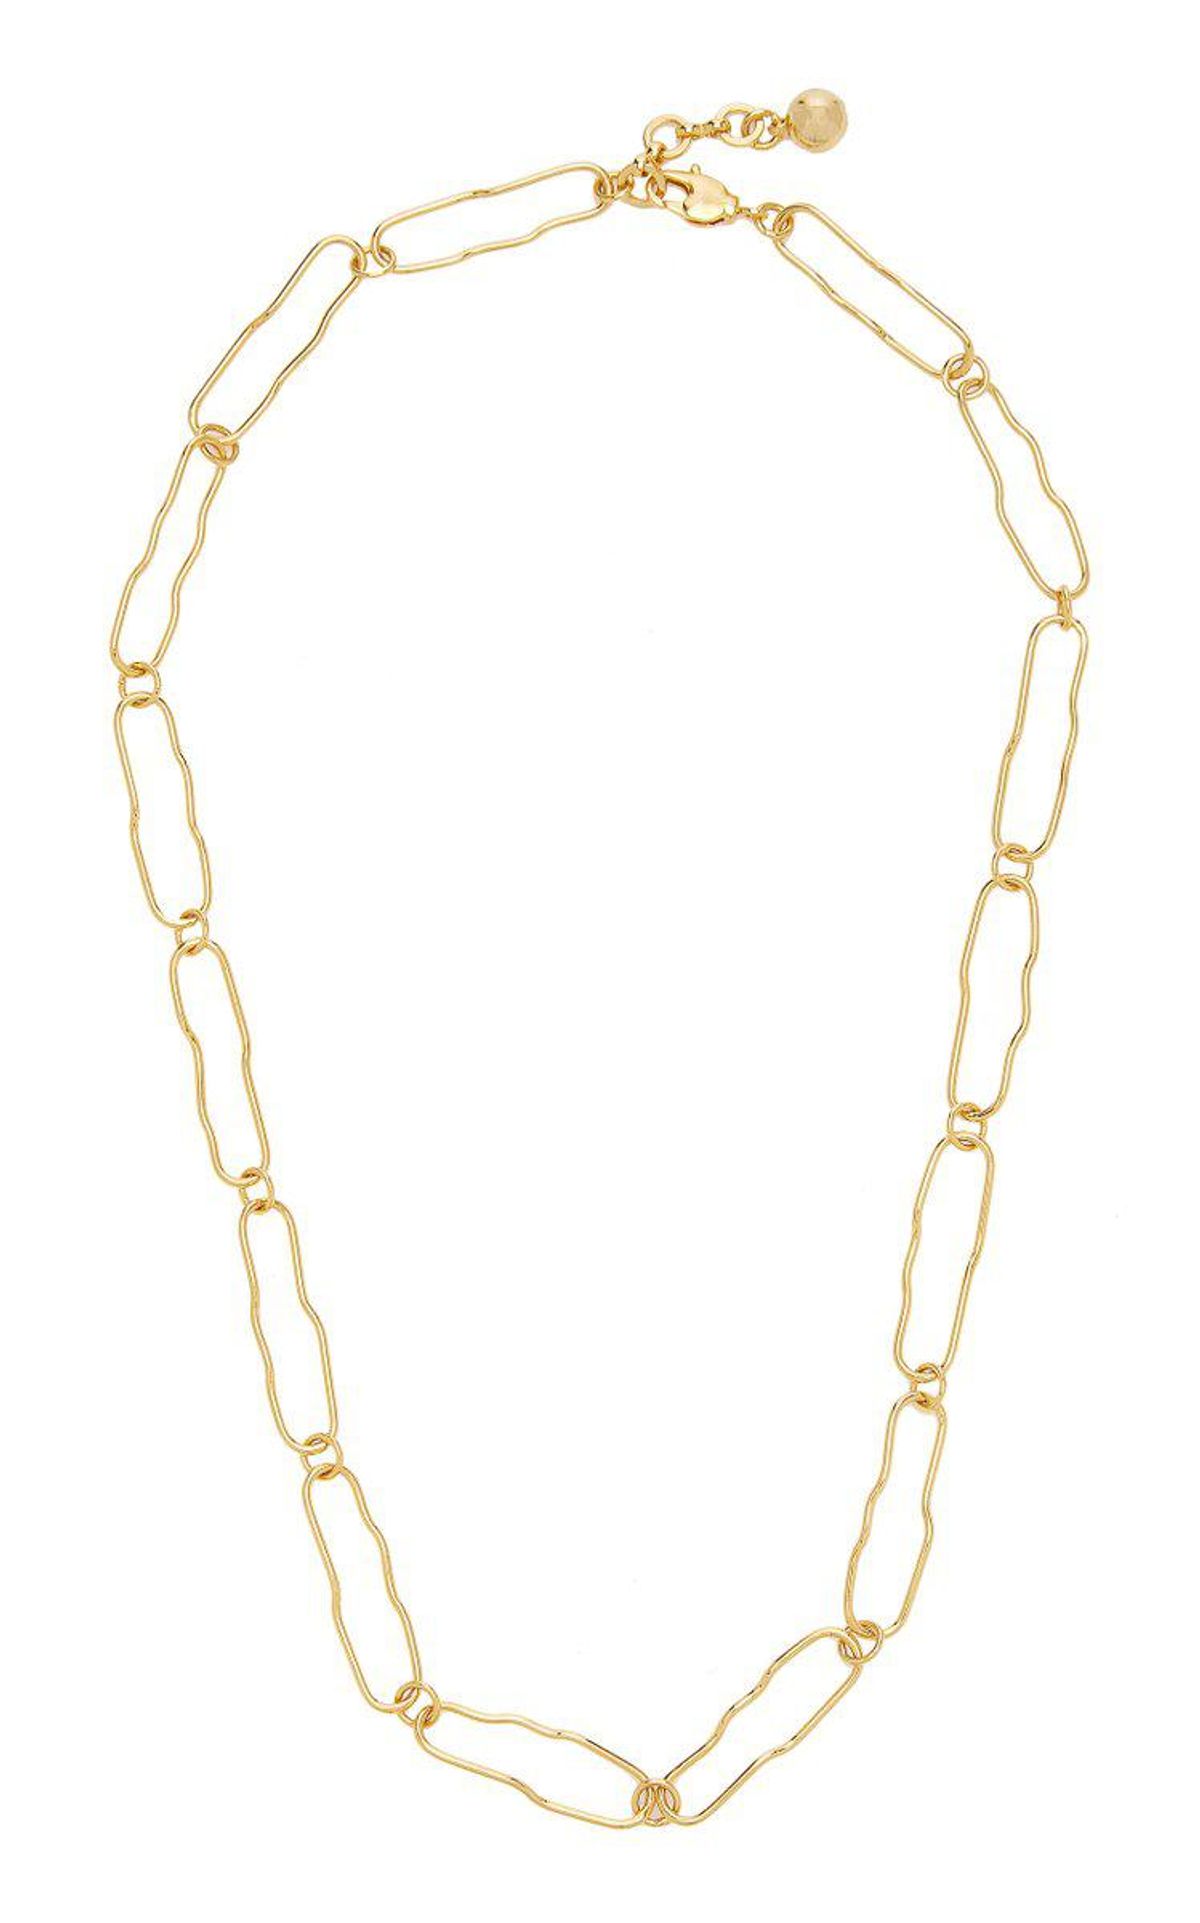 Dyad Chain Necklace